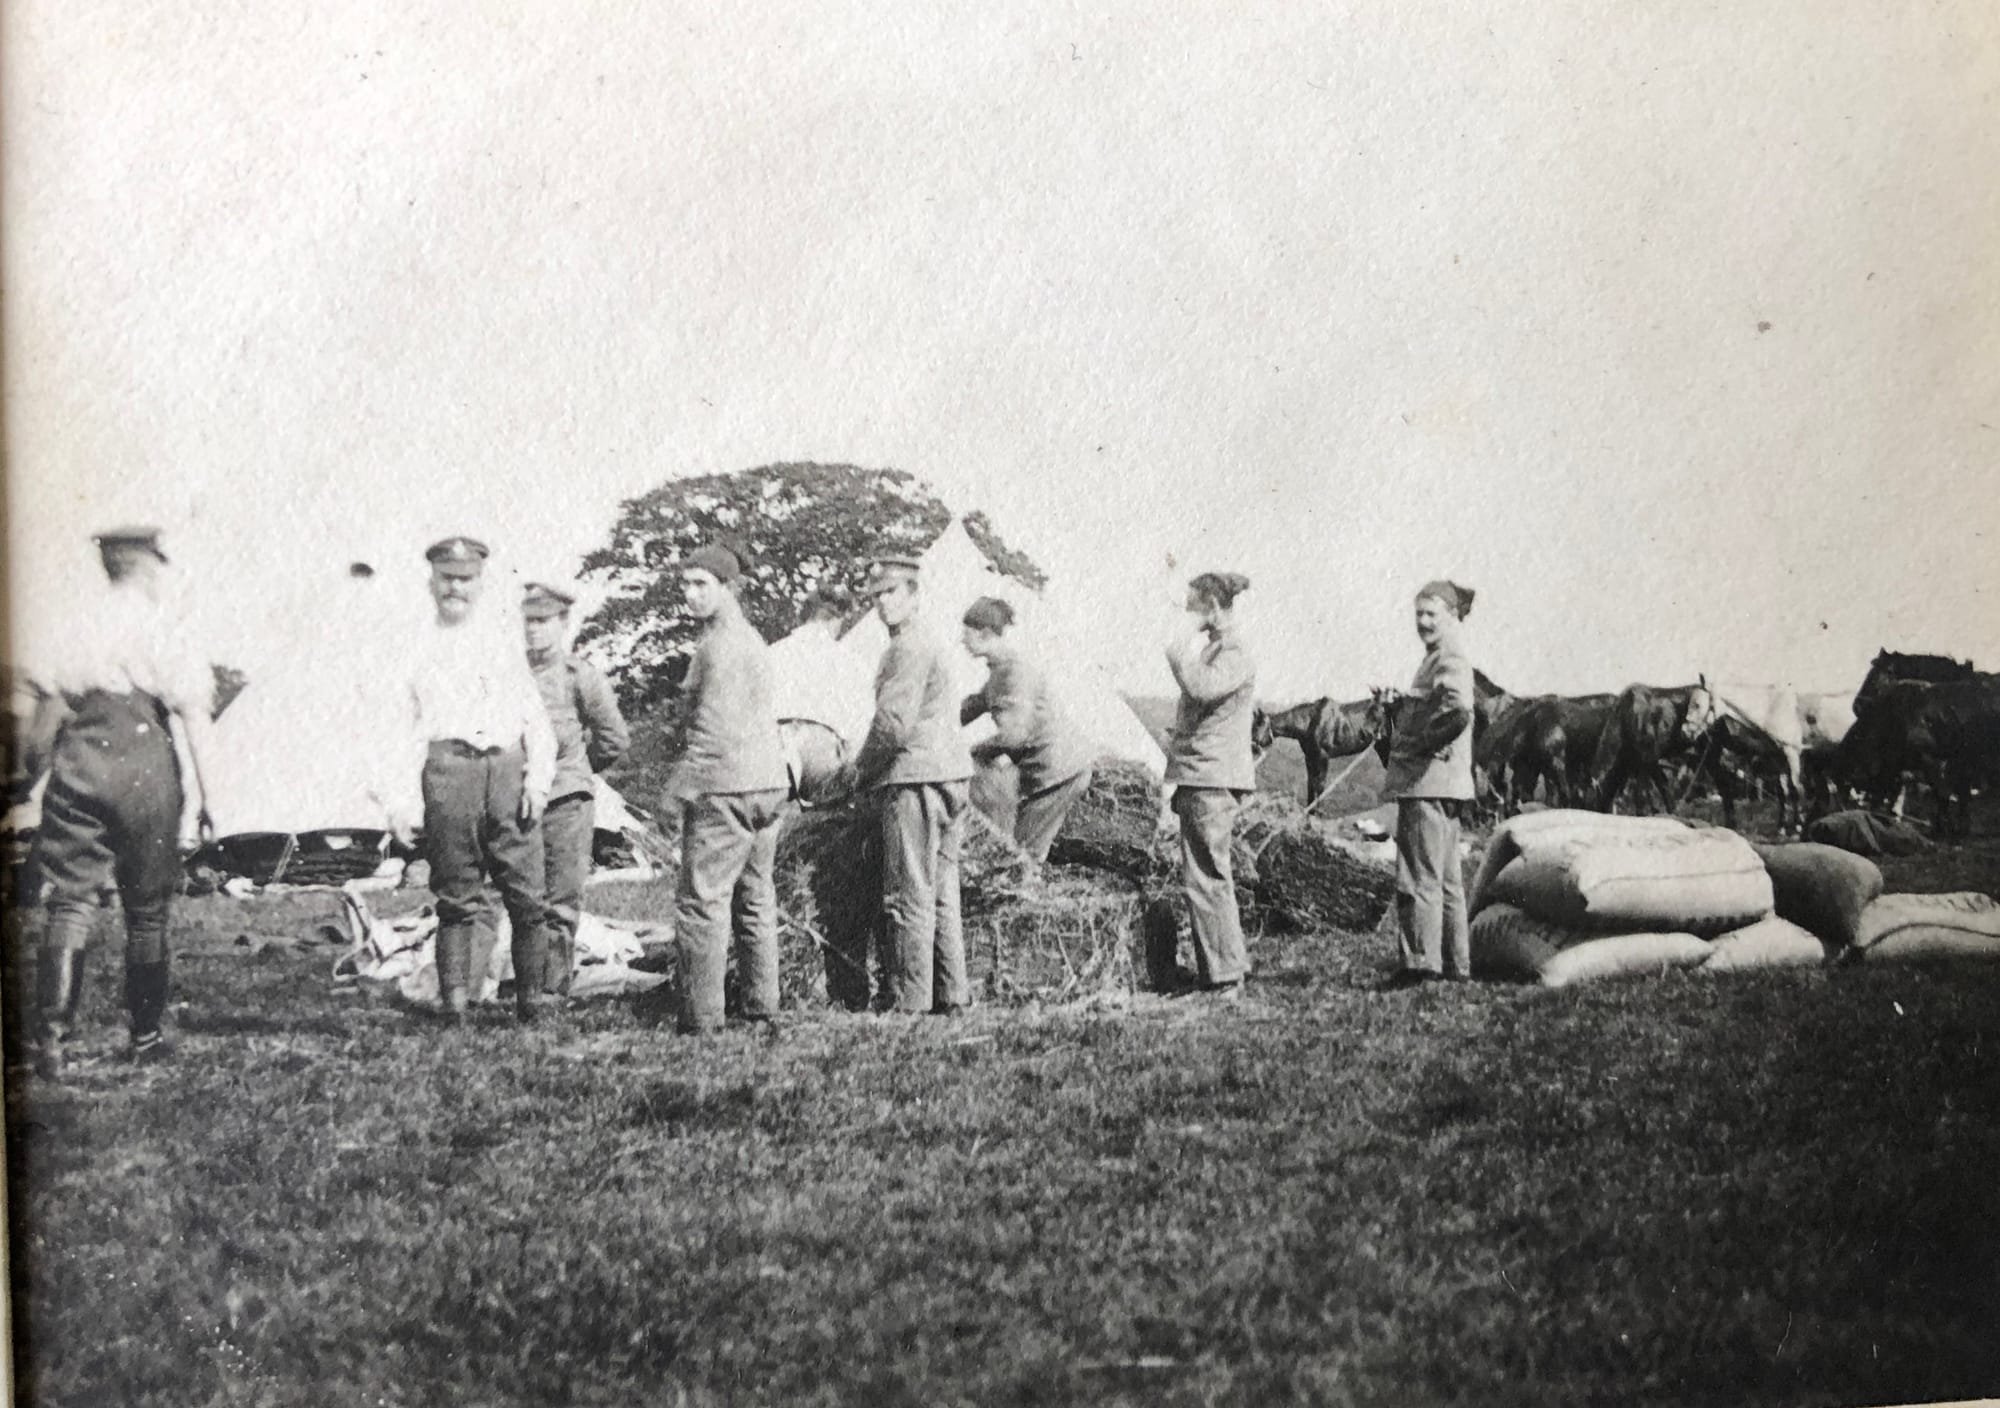 Collecting forage for the horses at Latimer Camp in 1903. Squadron Sergeant Major Thomson is the figure second from left and Corporal Dick, 46 is standing behind him.